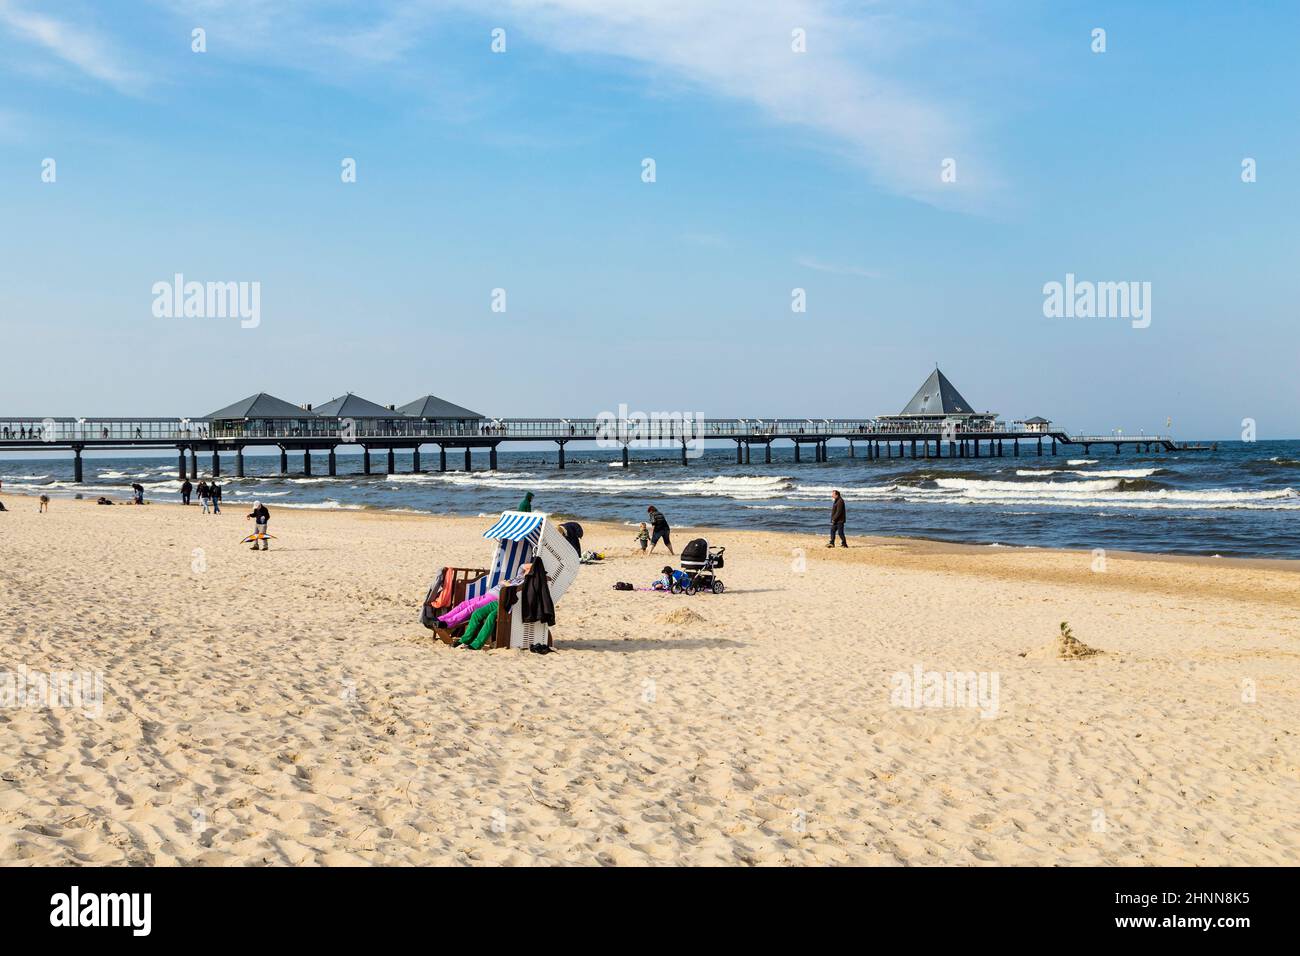 people enjoy pier and beach of Ahlbeck Stock Photo